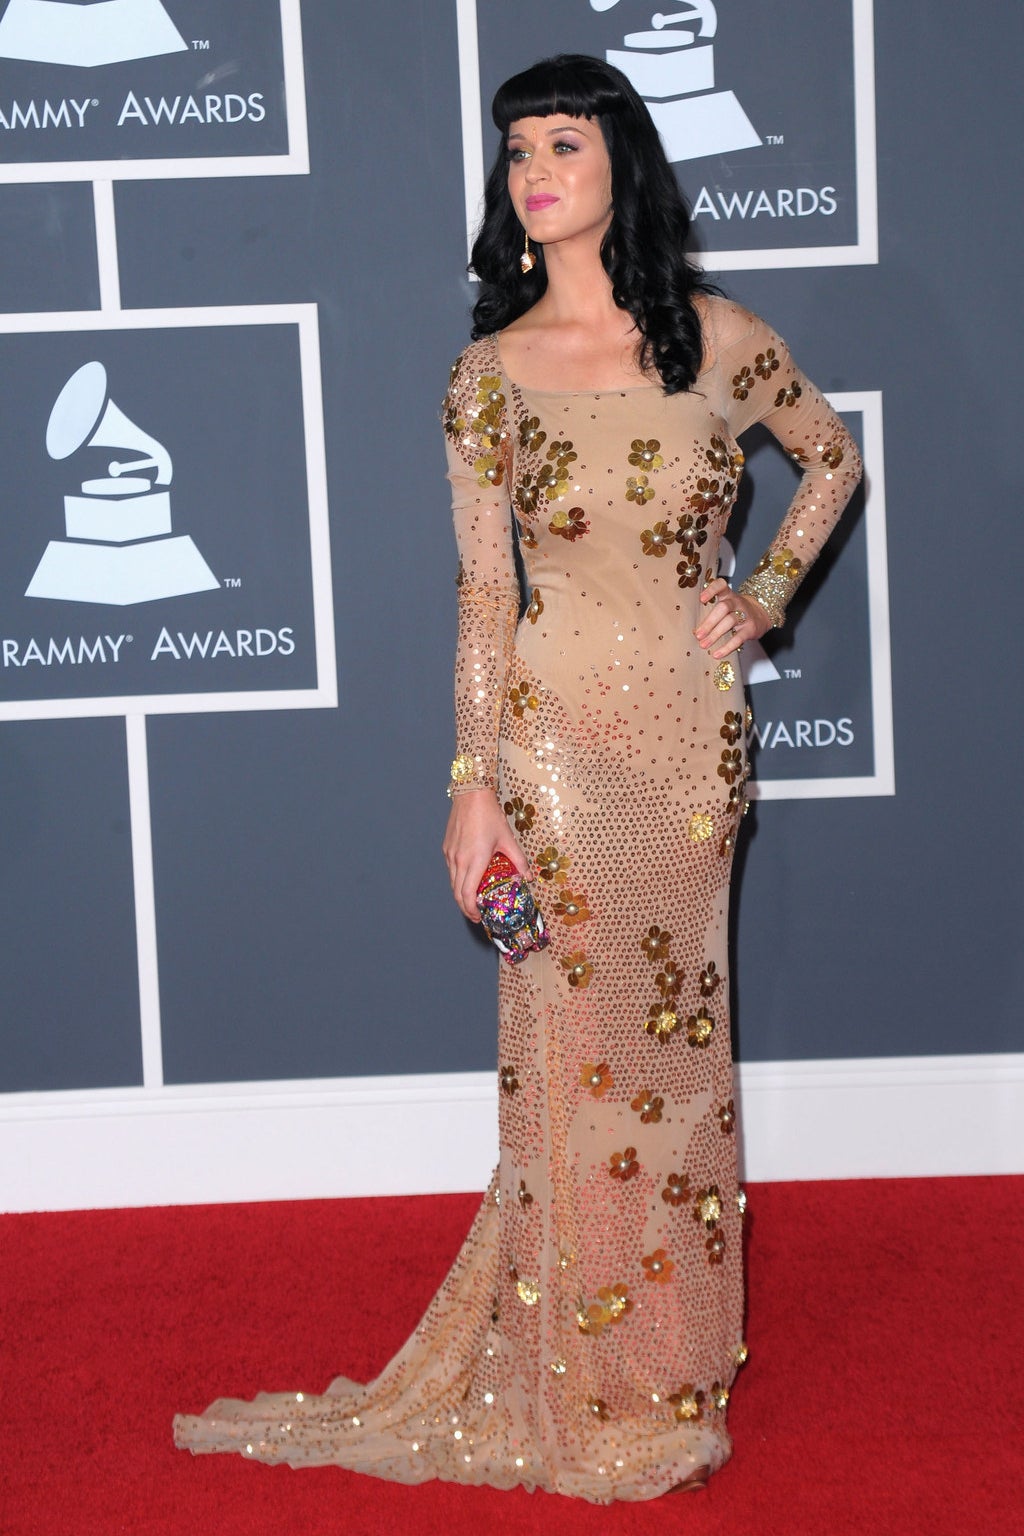 8 Celebrity Transformations You Had To Appreciate At Tonight's Grammys